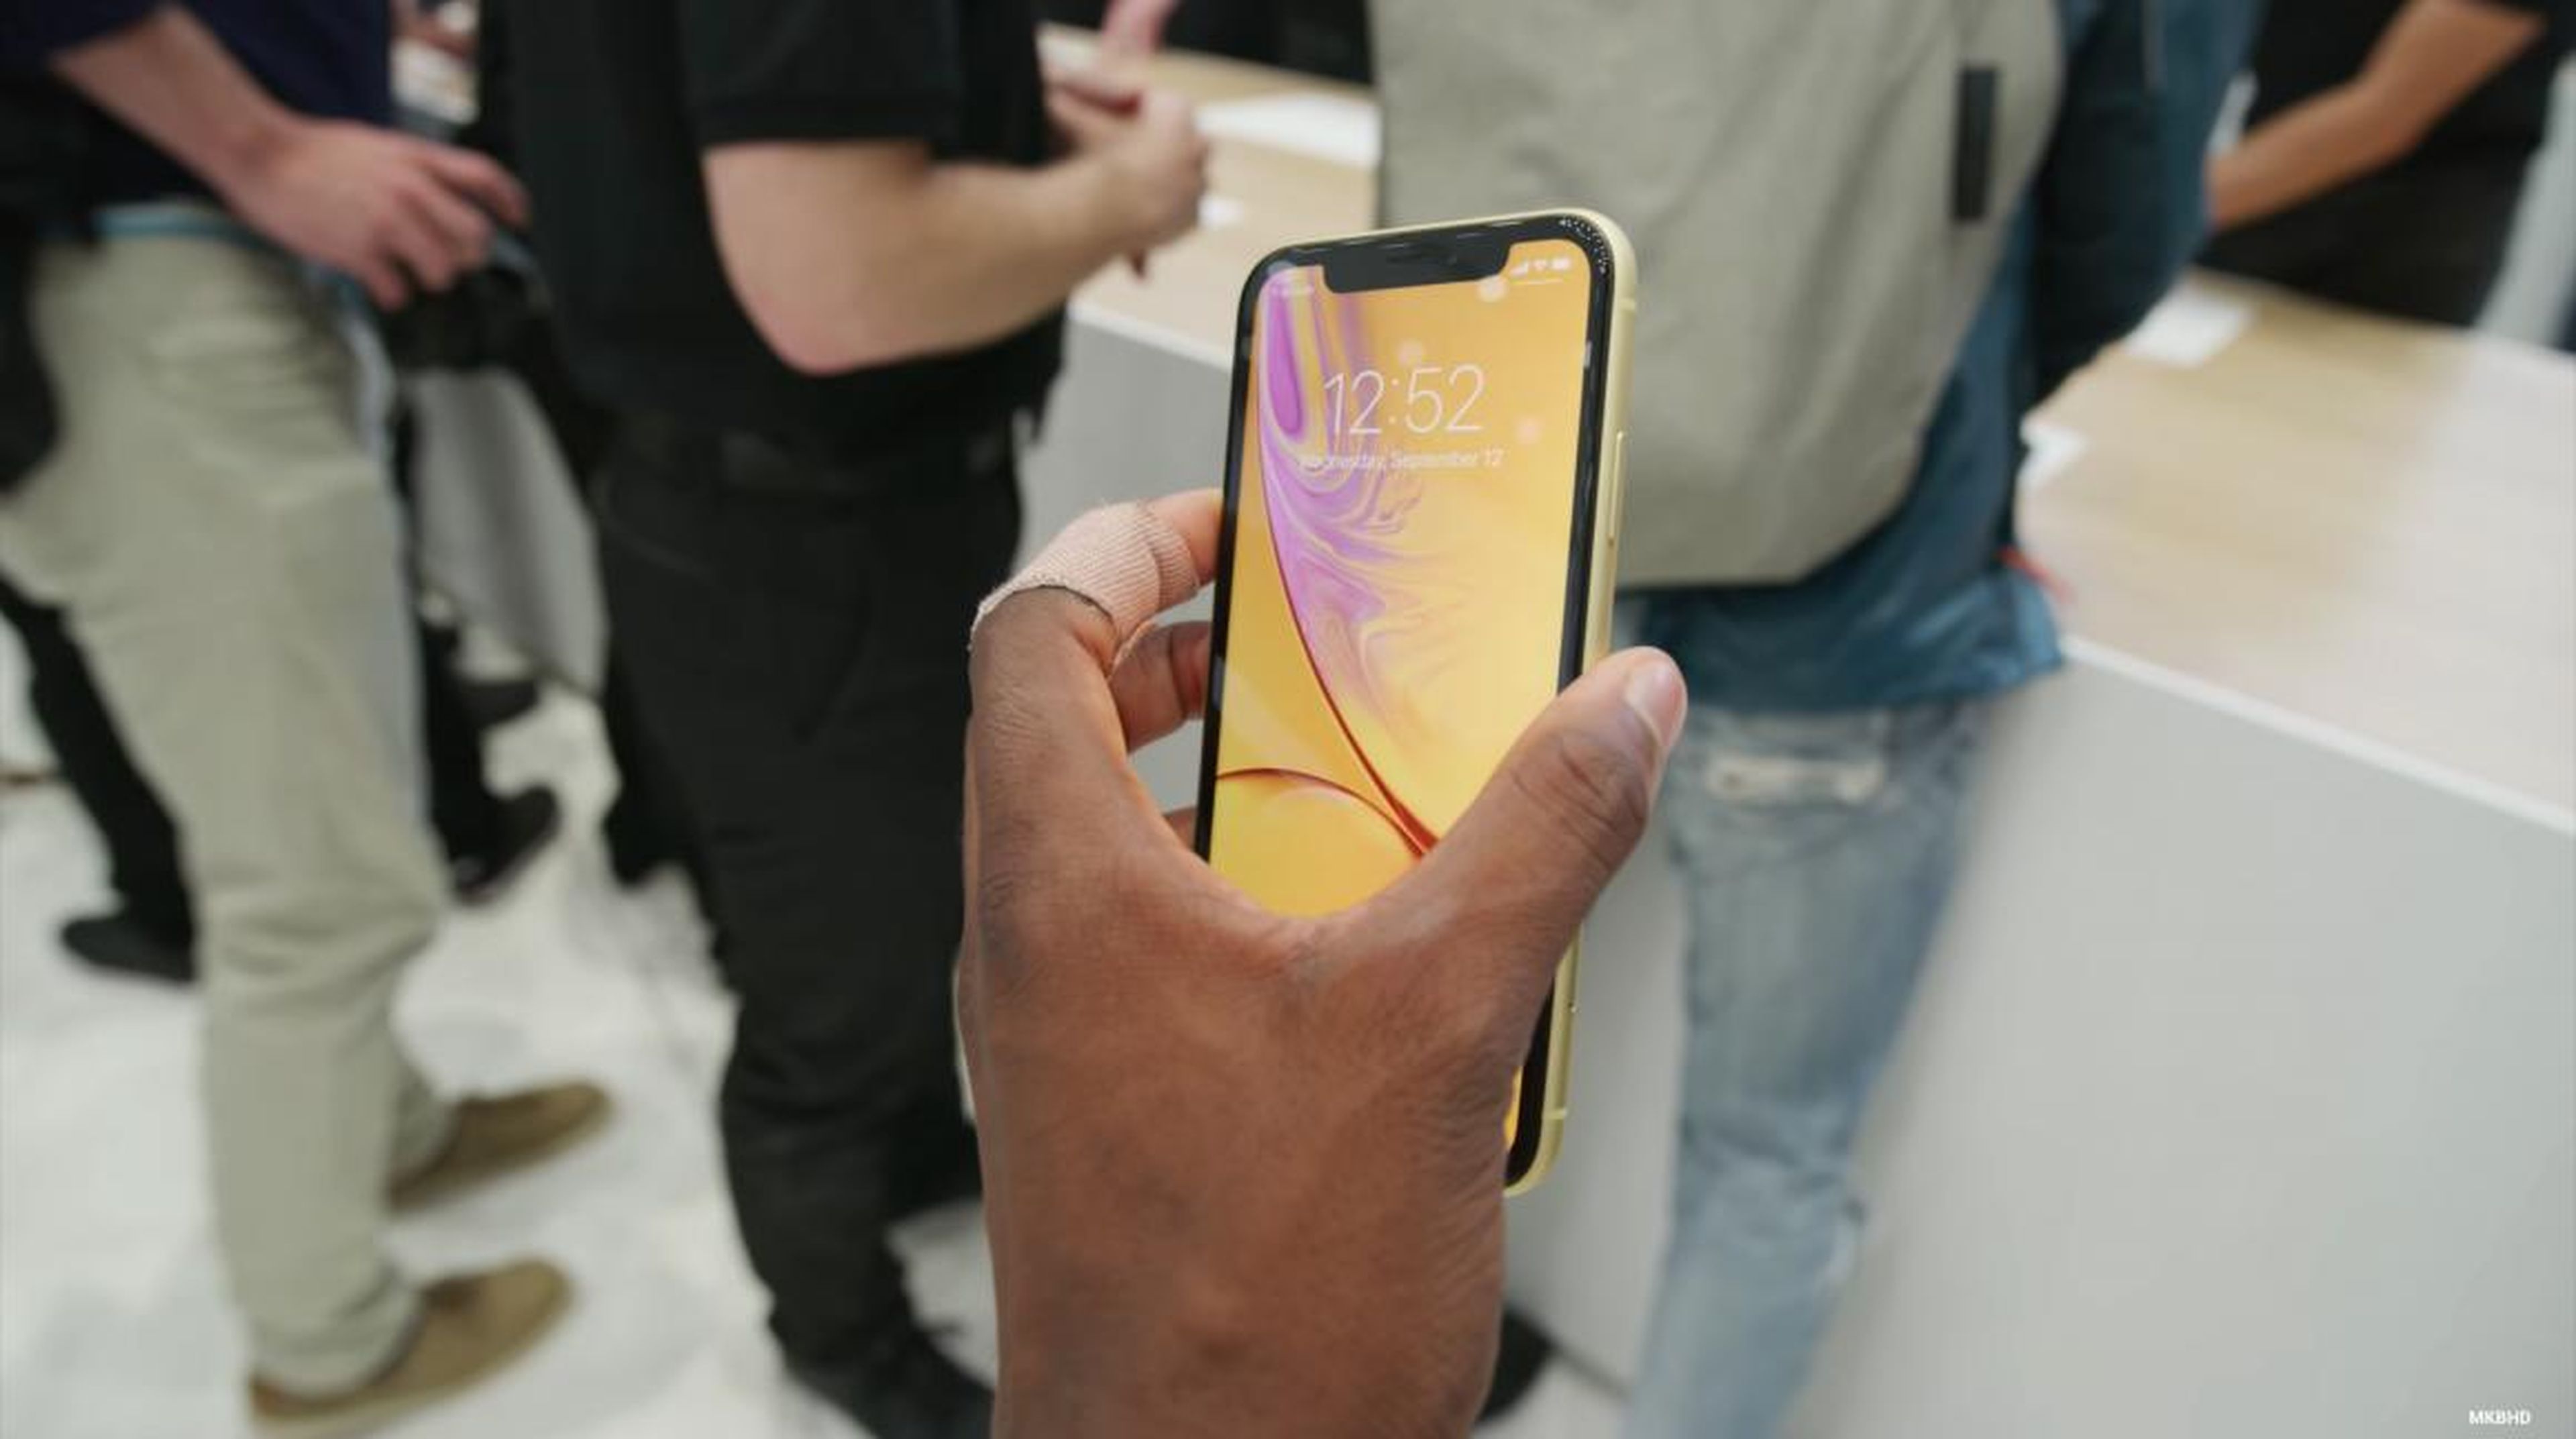 There aren't many yellow smartphones out there, but you can buy the iPhone XR in yellow. Here's what the front looks like.